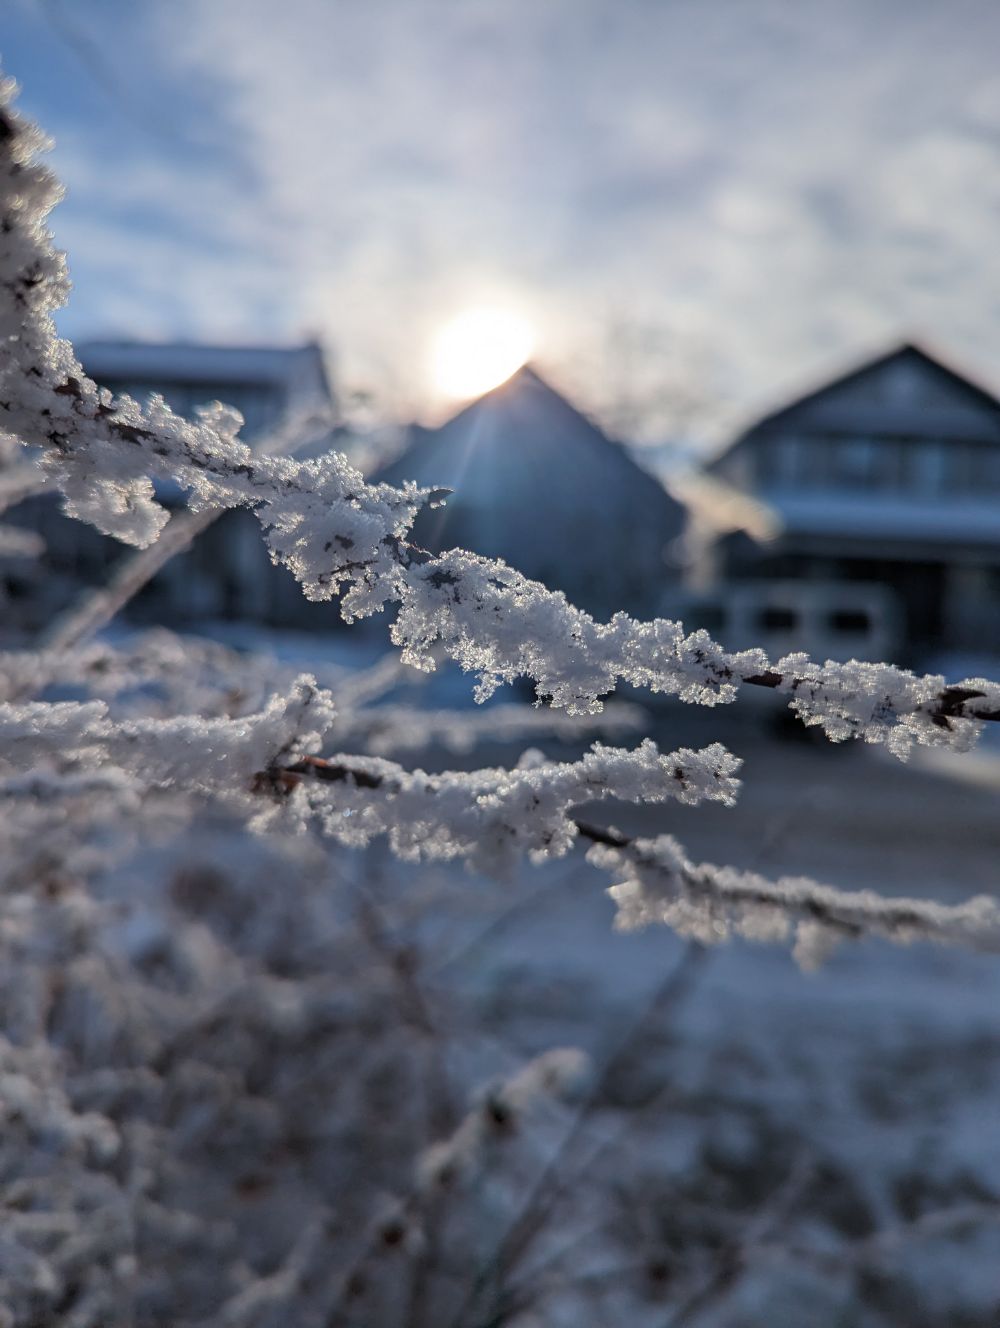 Frost on a branch, the sun peaks over the roof of a house in the background.